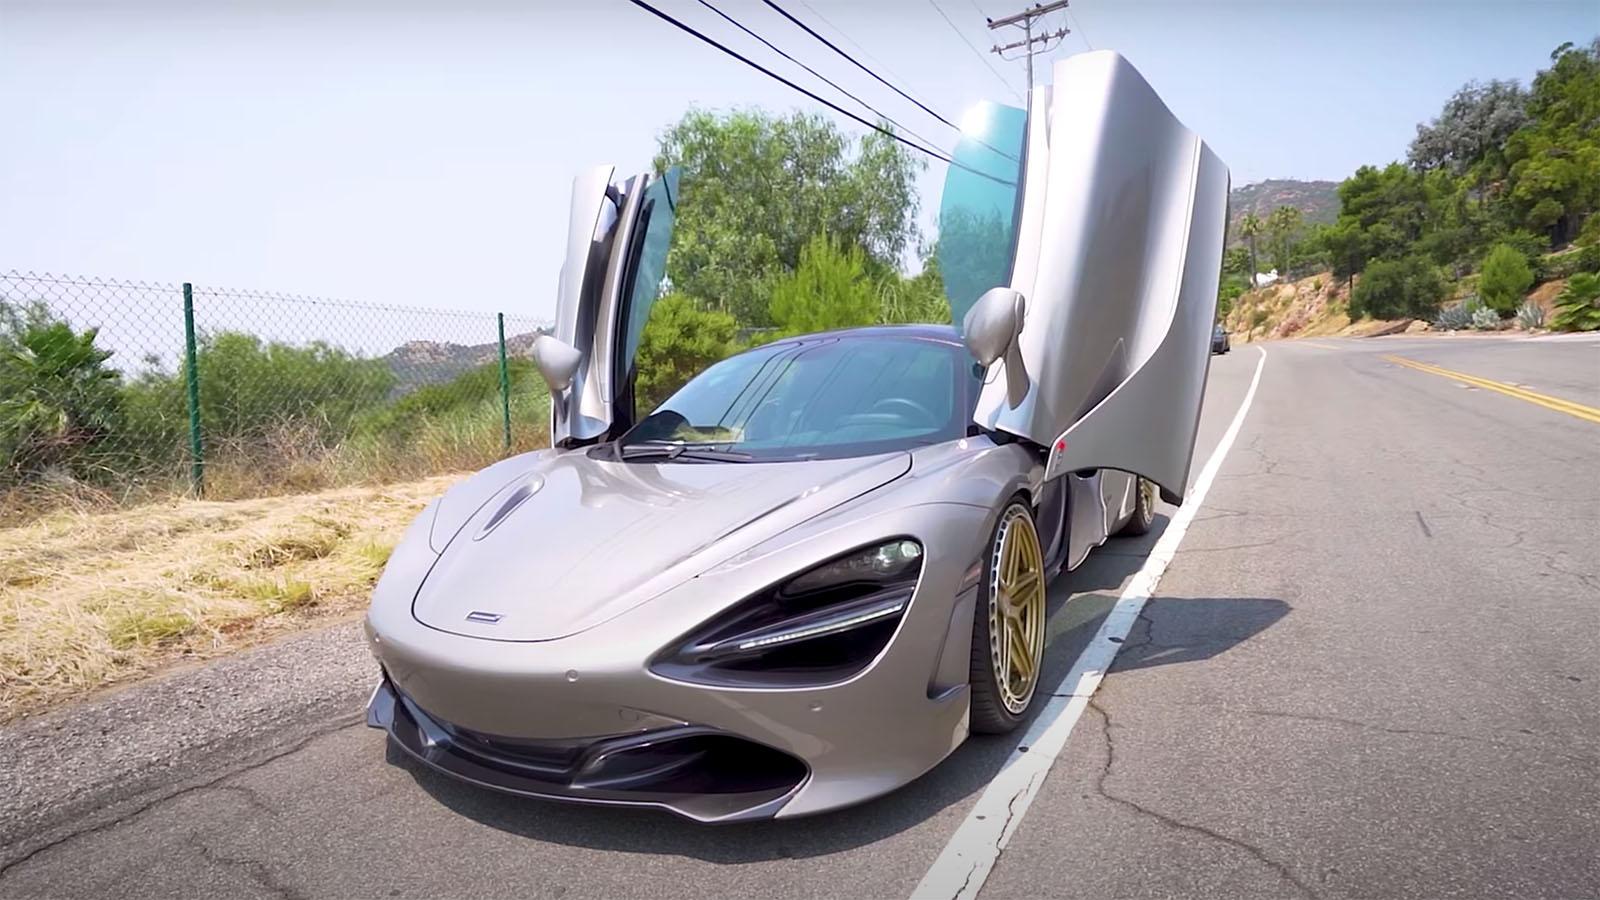 McLaren 720s Parked on the side of the road